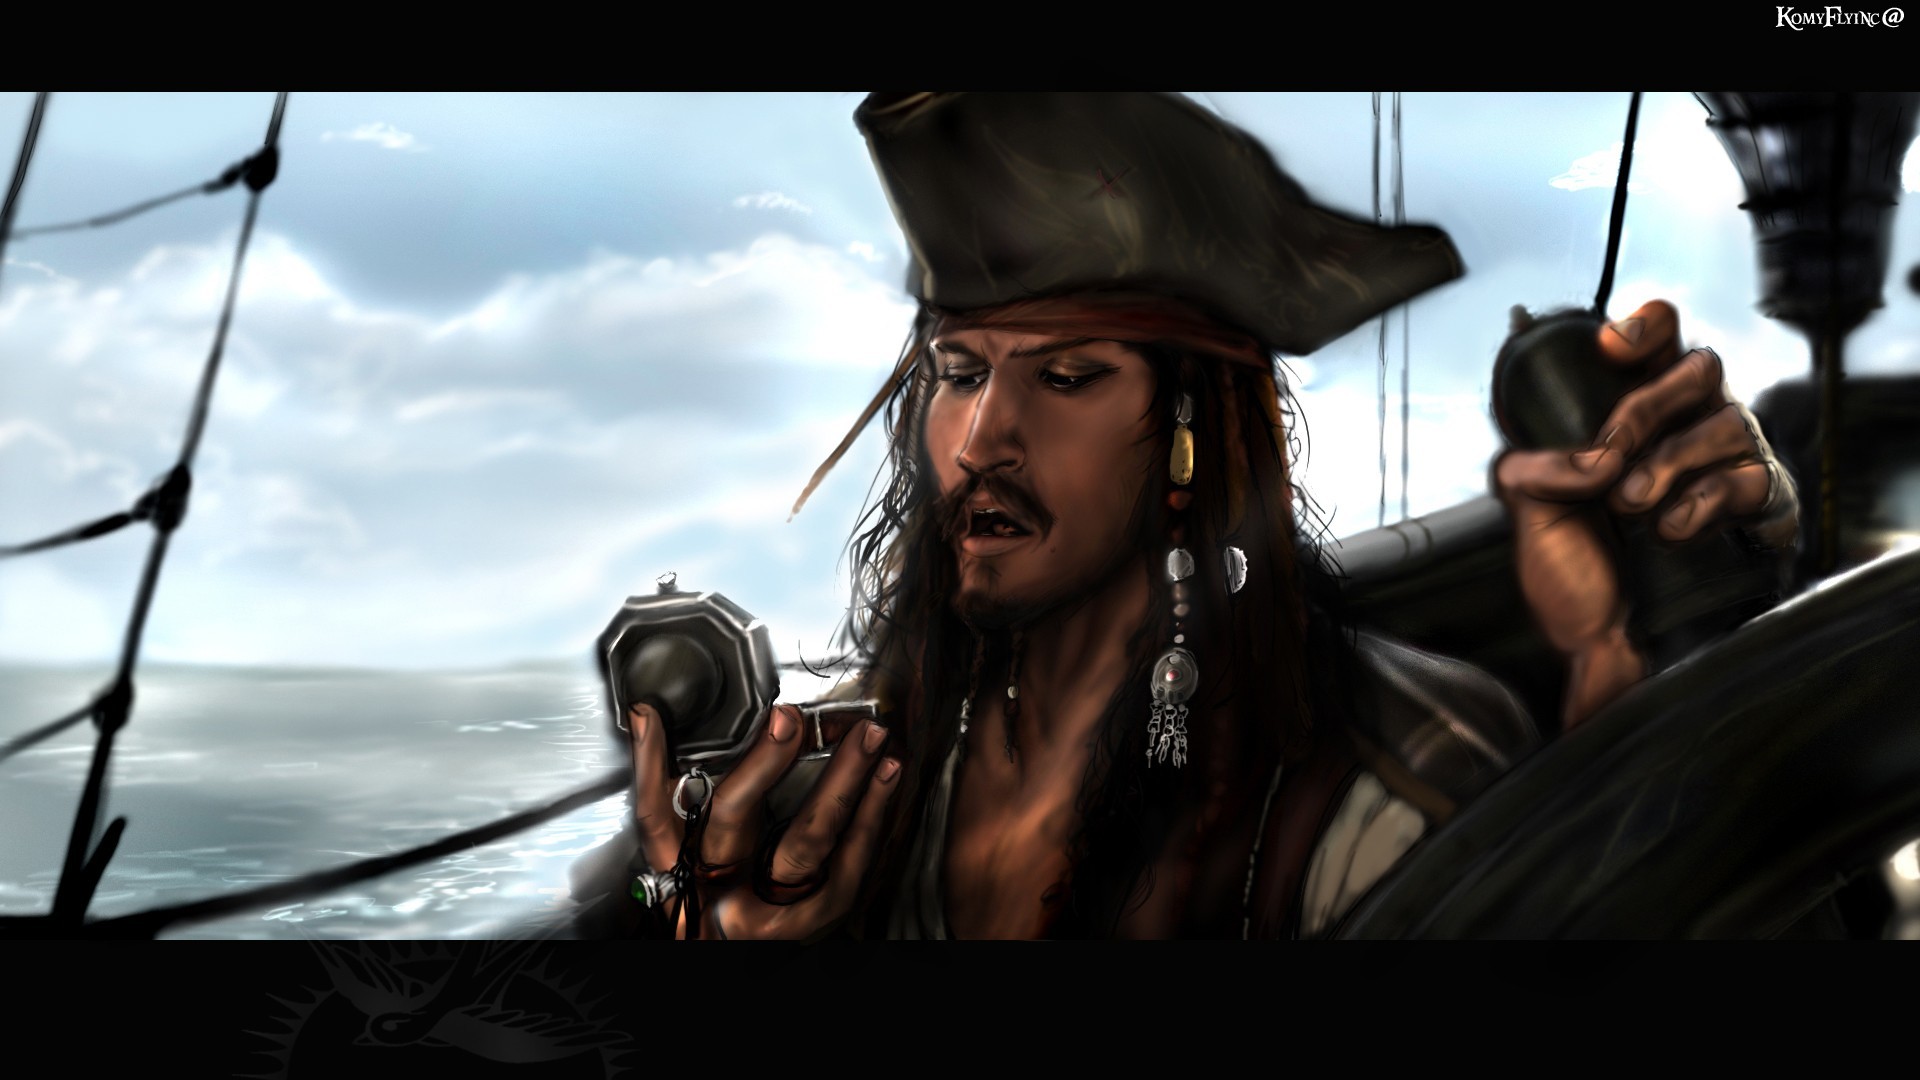 1920x1080 paintings clouds pirates Pirates of the Caribbean digital art Captain Jack  Sparrow hats airbrushed fan art black hair black pearl compass / Wallpaper